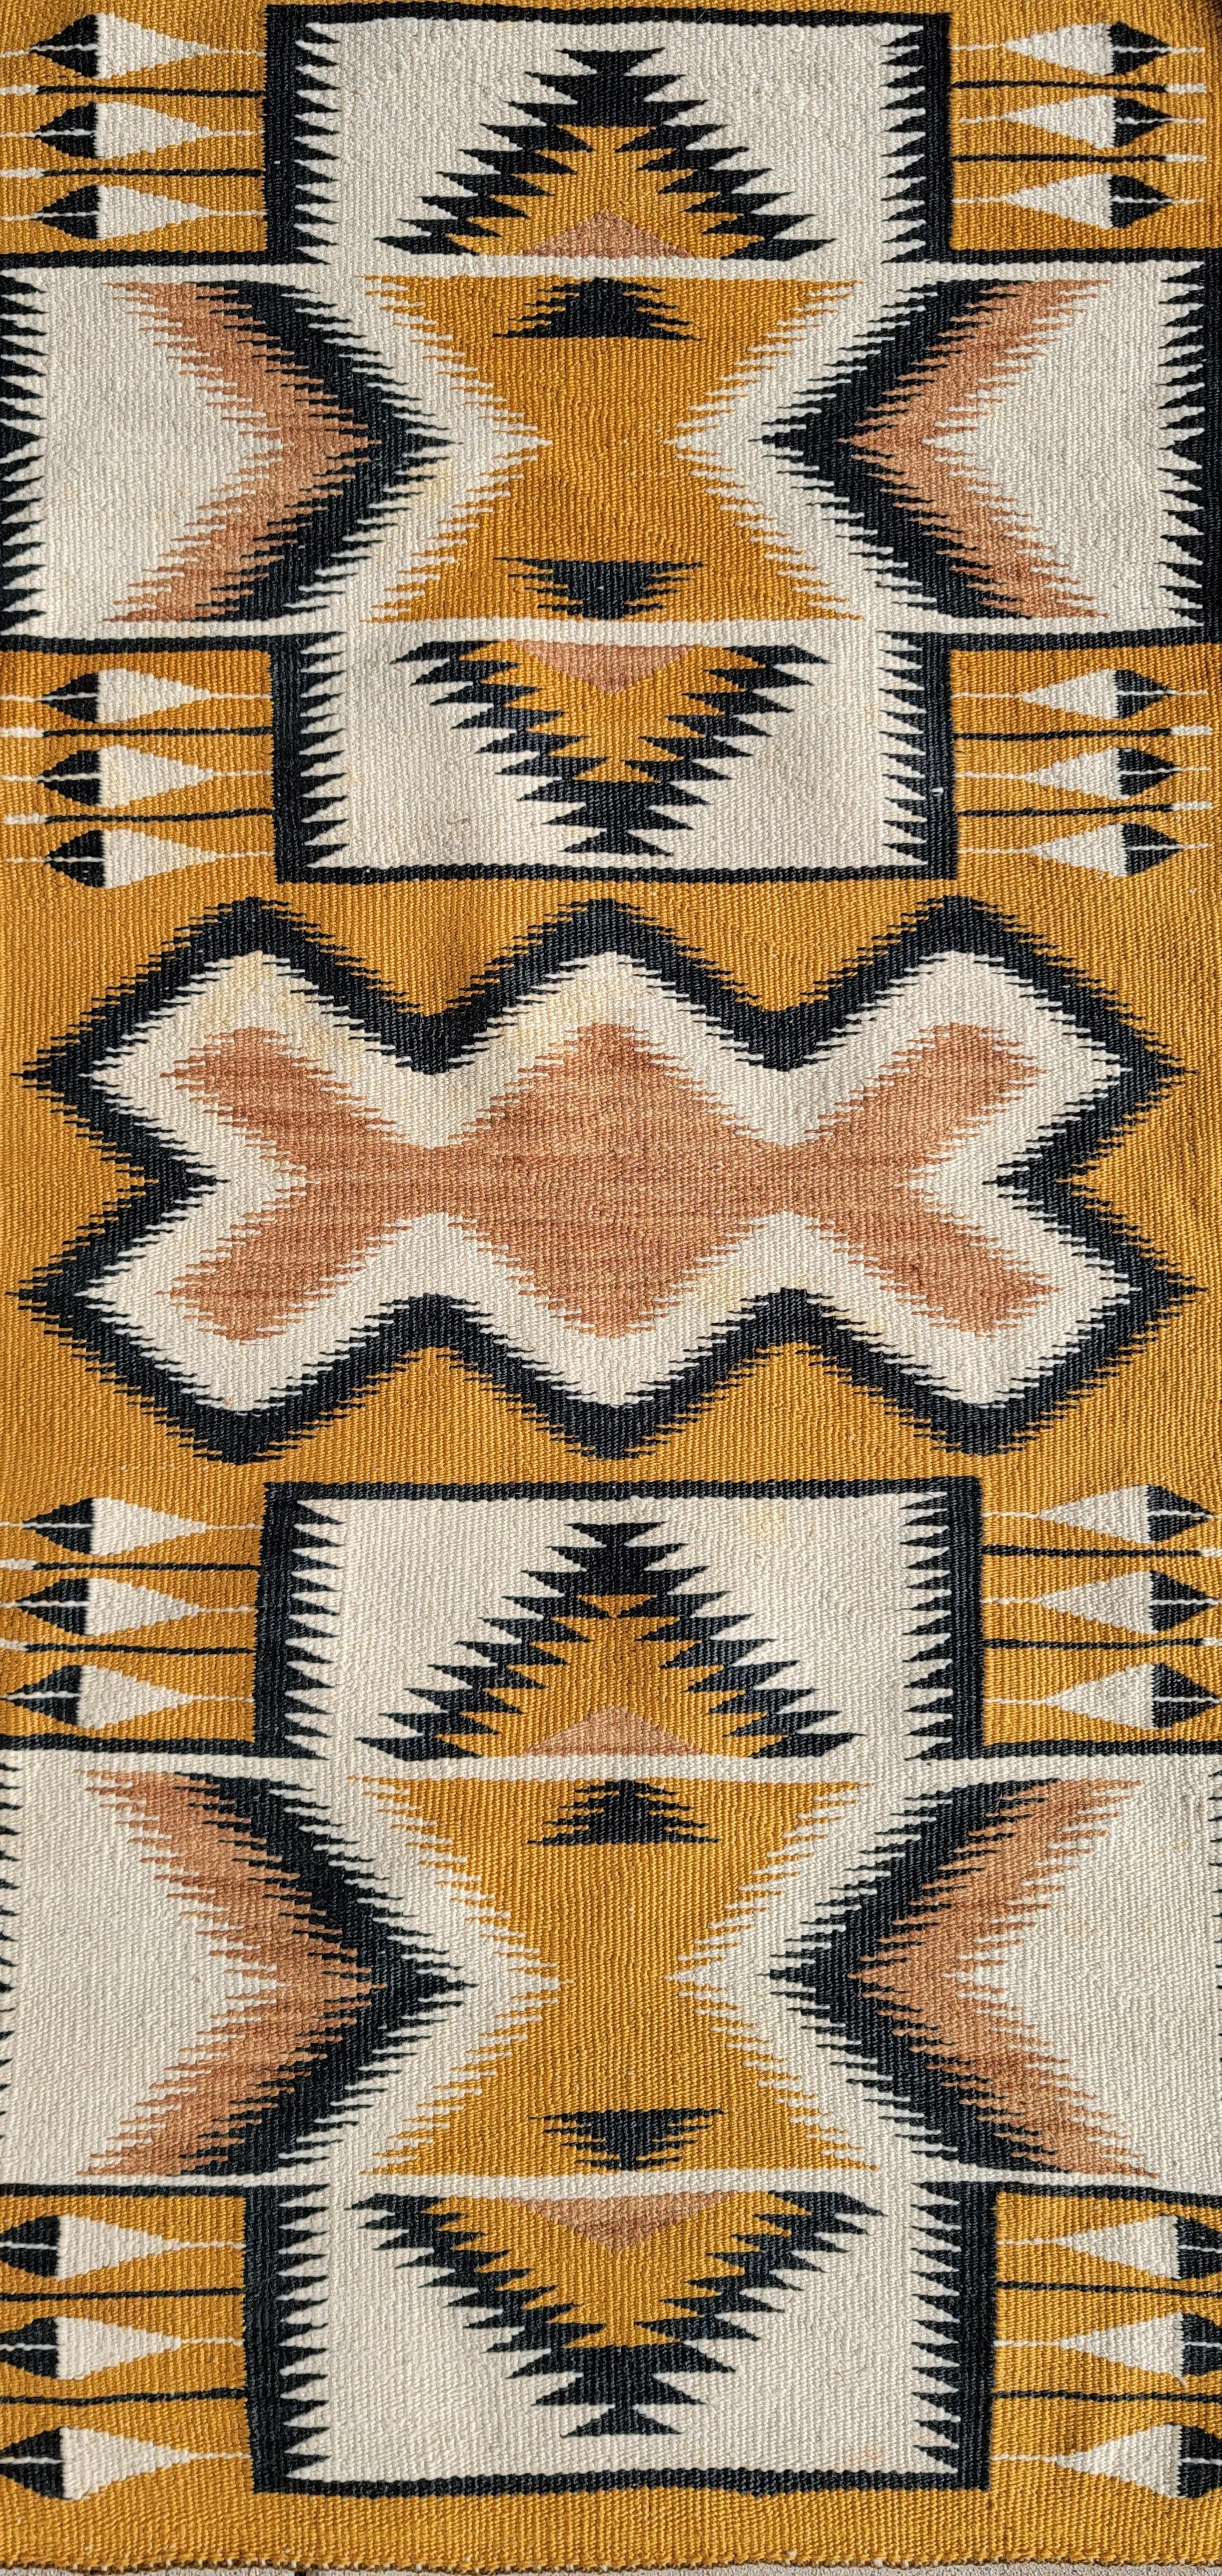 This amazing geometric Navajo Indian weaving made by the Chinle tribe.Notice the black feathers and amazing geometric pattern.